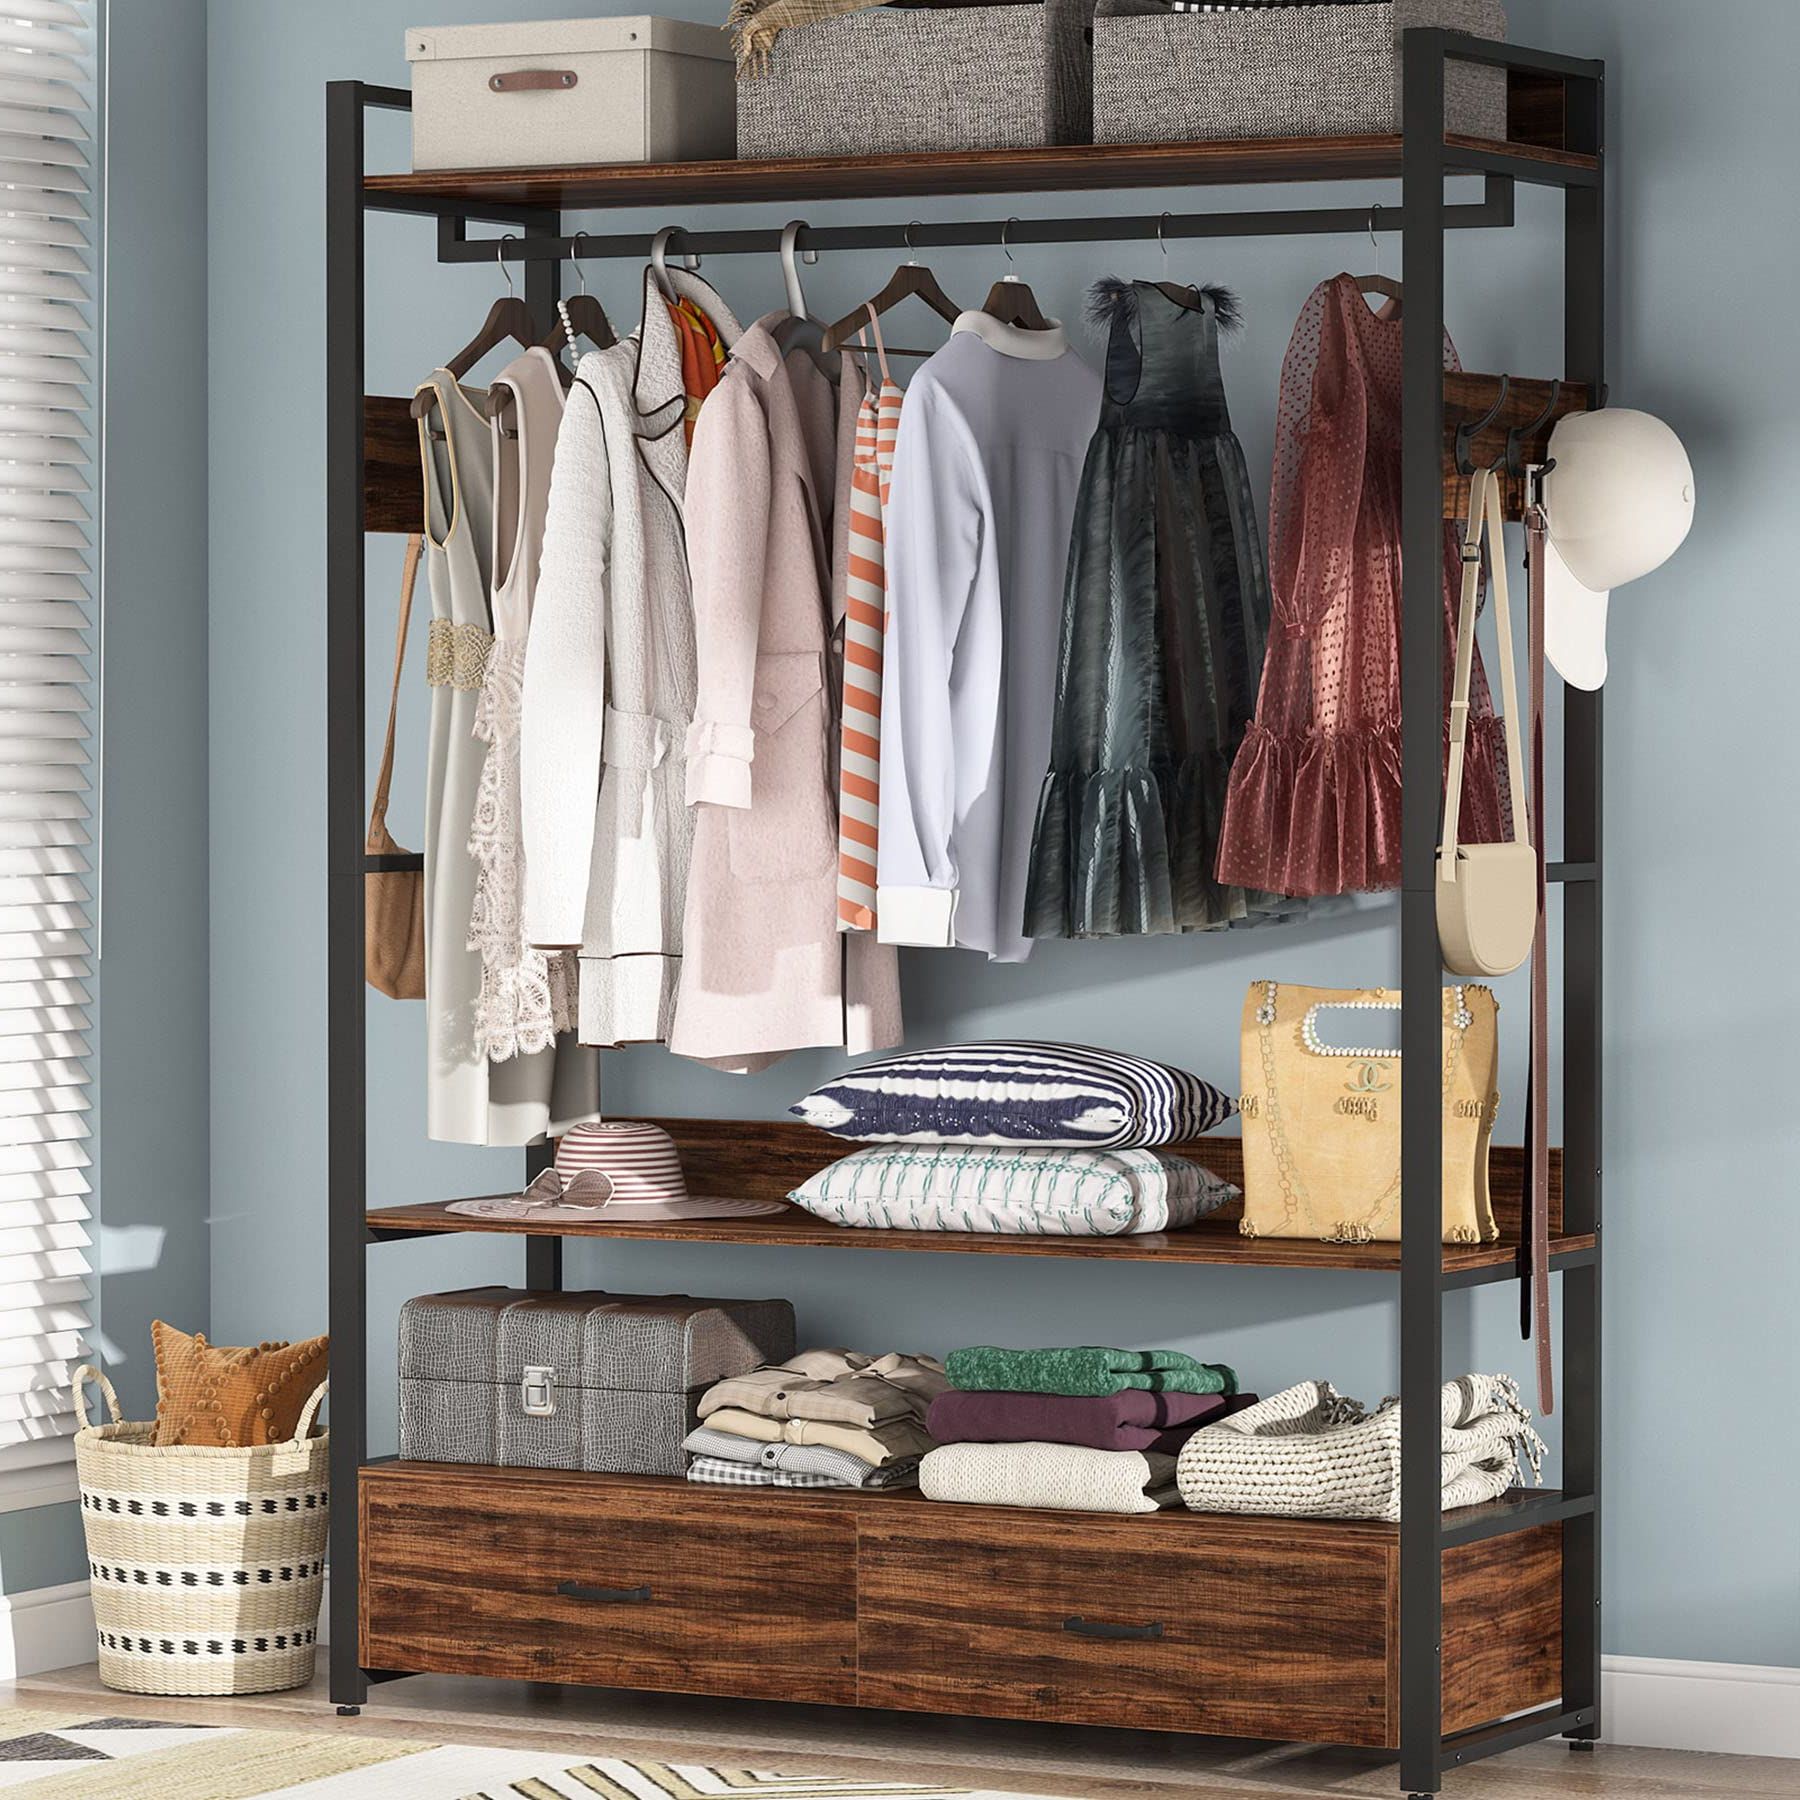 Wardrobes With Cover Clothes Rack Regarding Well Known Amazon: Tribesigns Freestanding Clothes Rack Shelves, Closet Organizer  With Shelves Drawers And Hooks, Heavy Duty Garment Clothing Wardrobe  Storage Shelving With Hanging Rod, Rustic : Home & Kitchen (View 5 of 10)